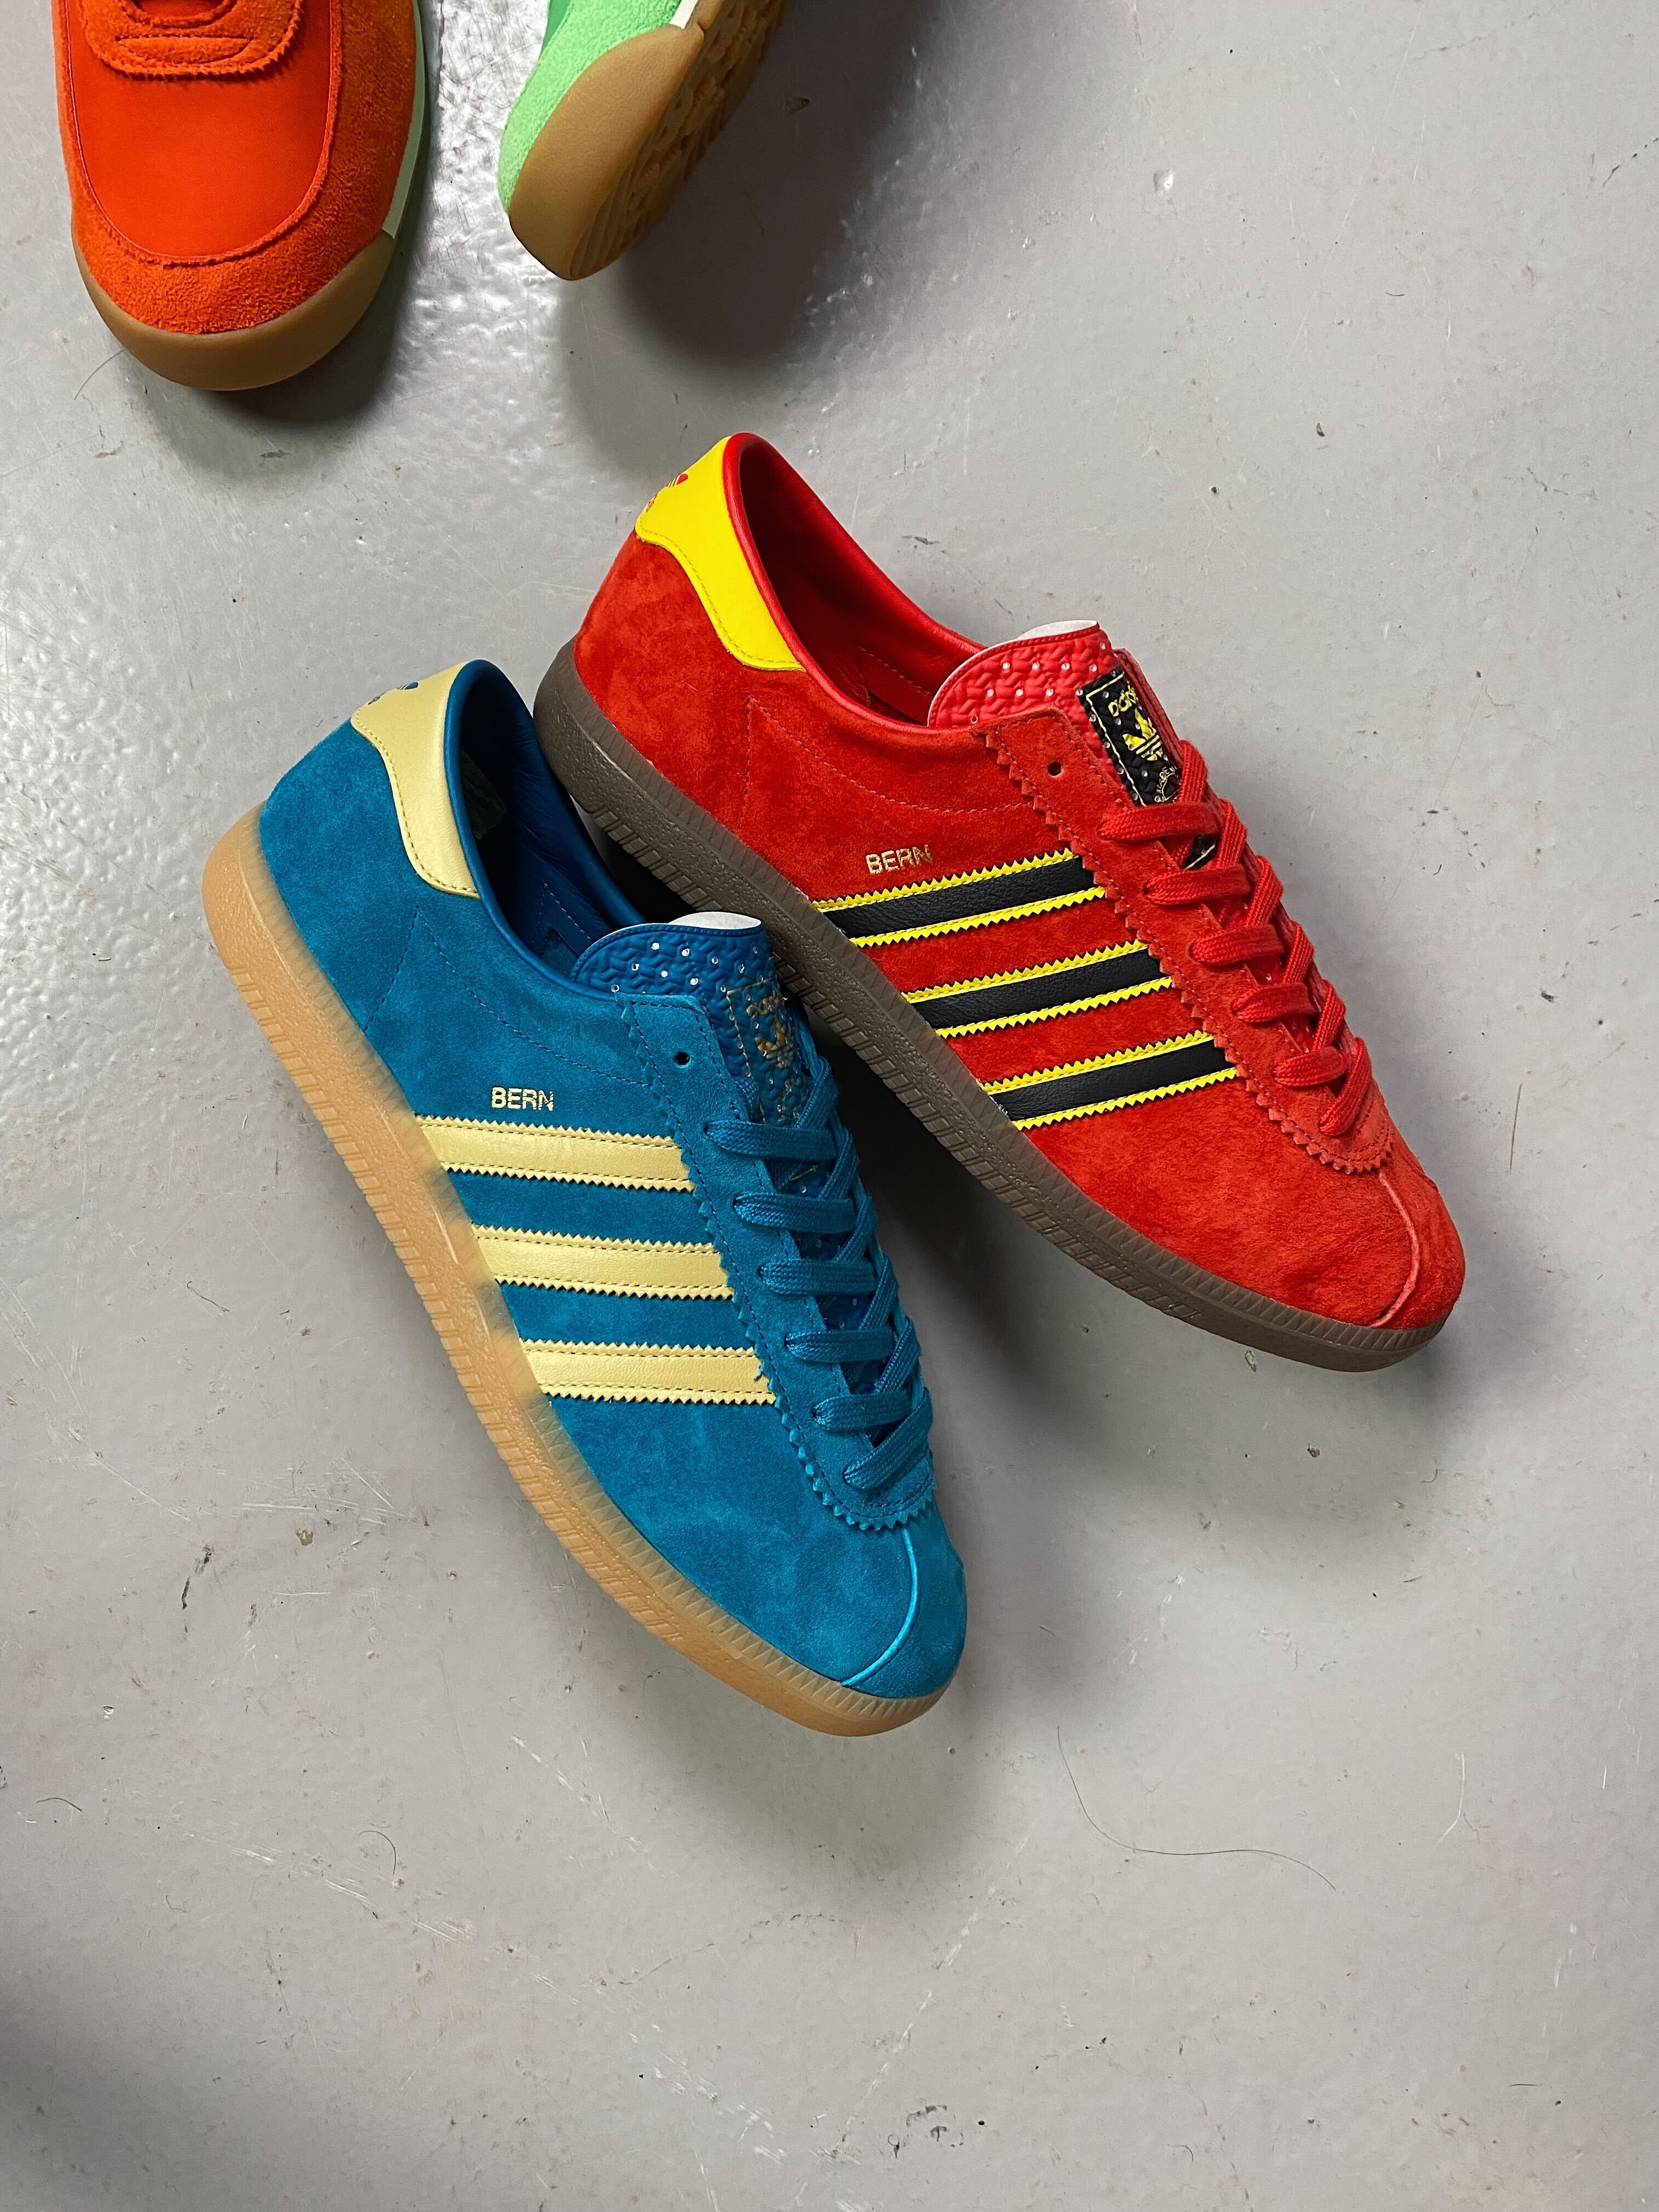 Man Savings on Twitter: "adidas Bern X - Coming soon More details the @sizeofficial Previews show 4 on Sunday night Release Date TBC #adidasbern https://t.co/hip47NYfks" / Twitter